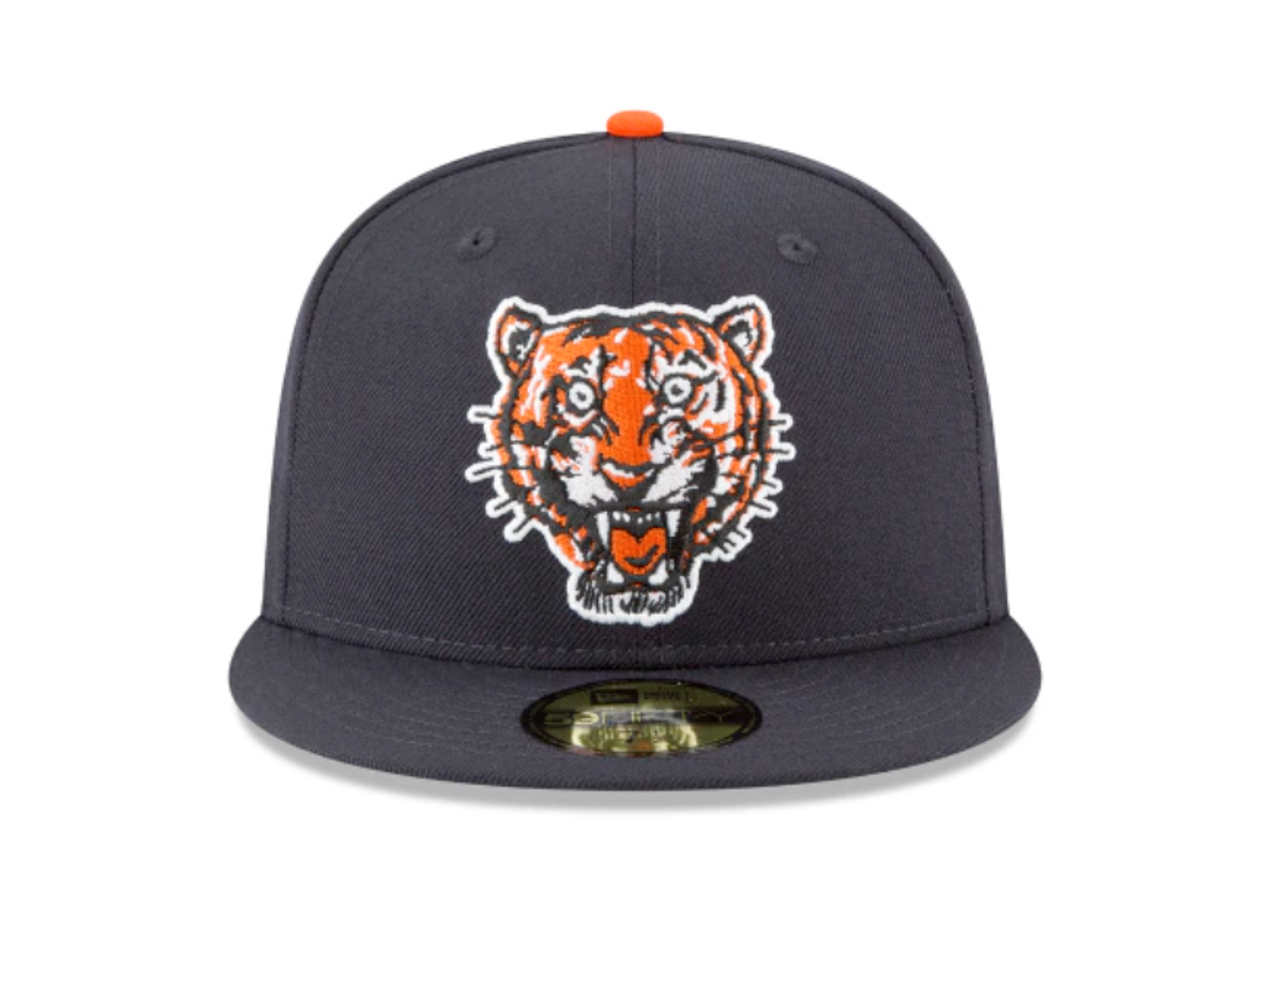 Detroit Tigers Cooperstown Collection, Tigers Cooperstown Jerseys, Hats